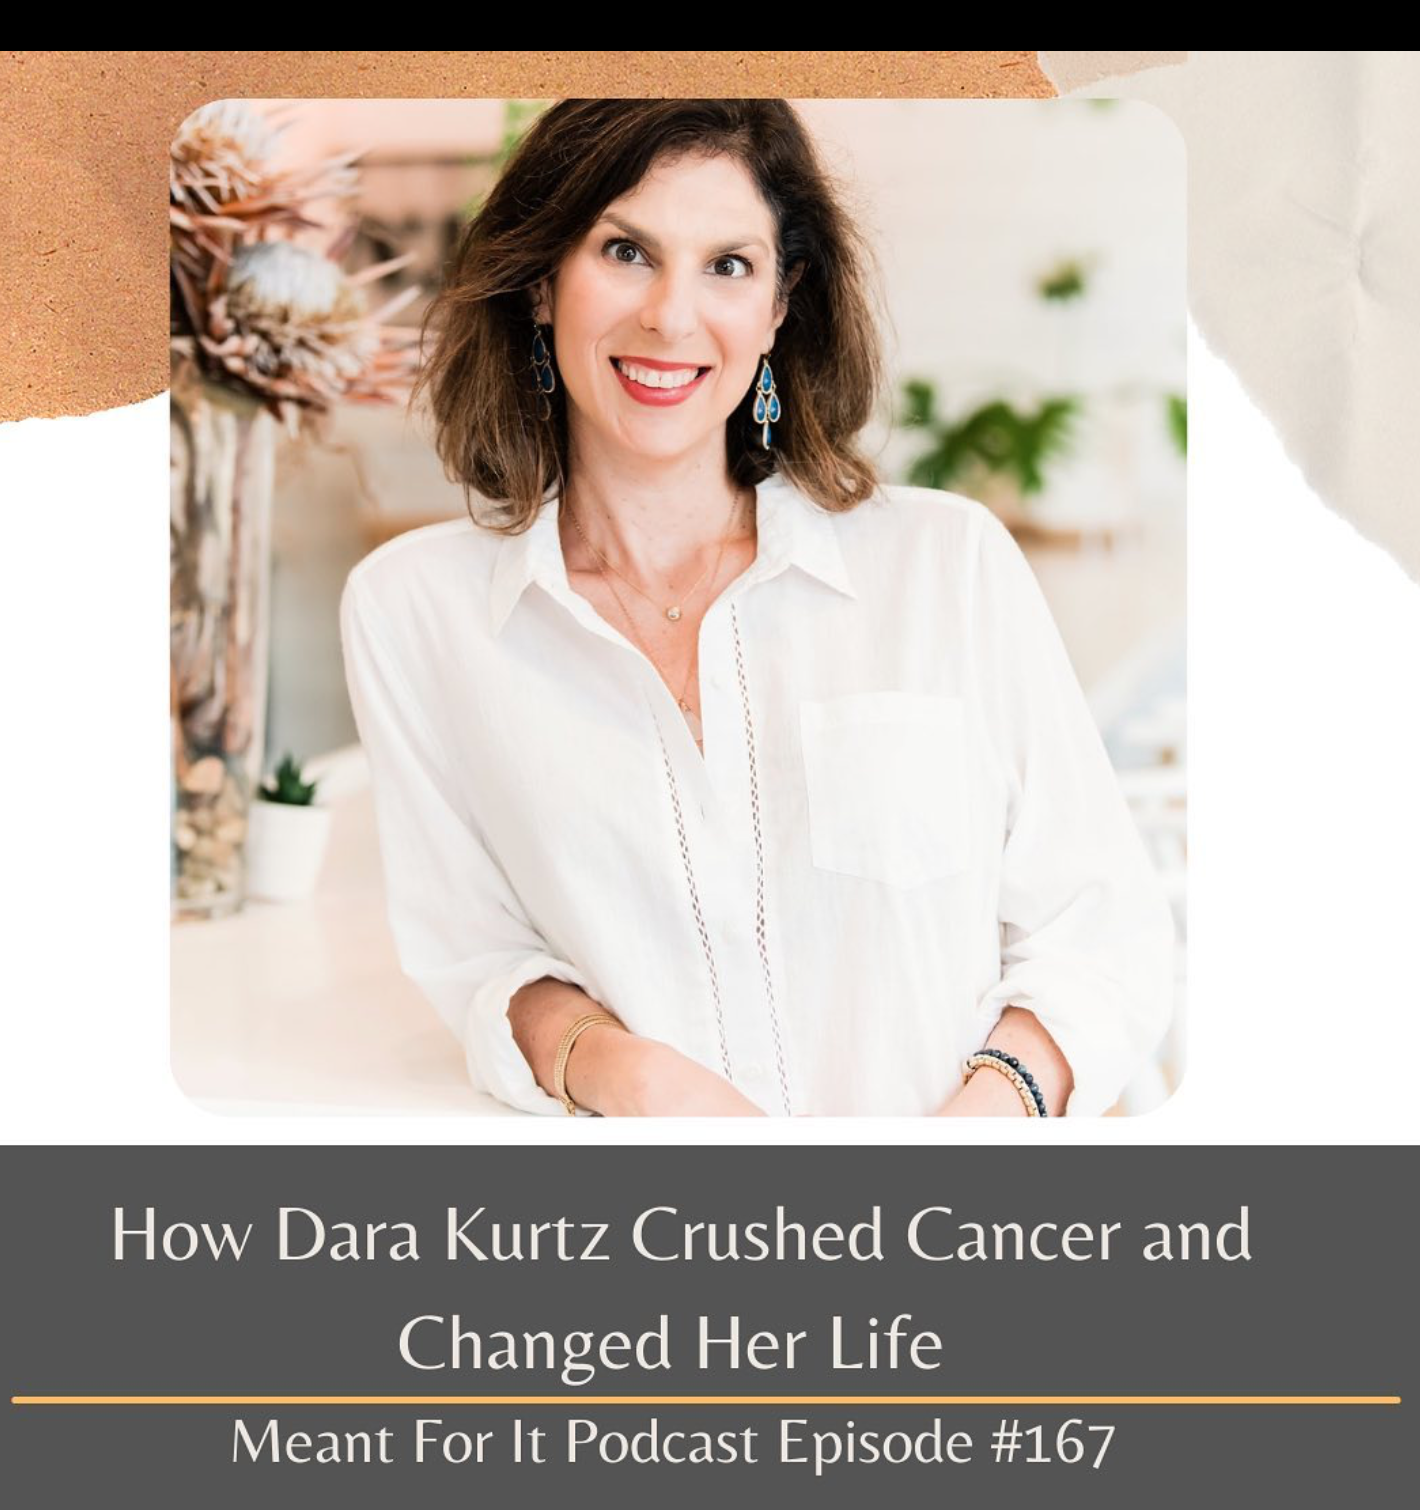 #167 How Dara Kurtz Crushed Cancer and Changed Her Life